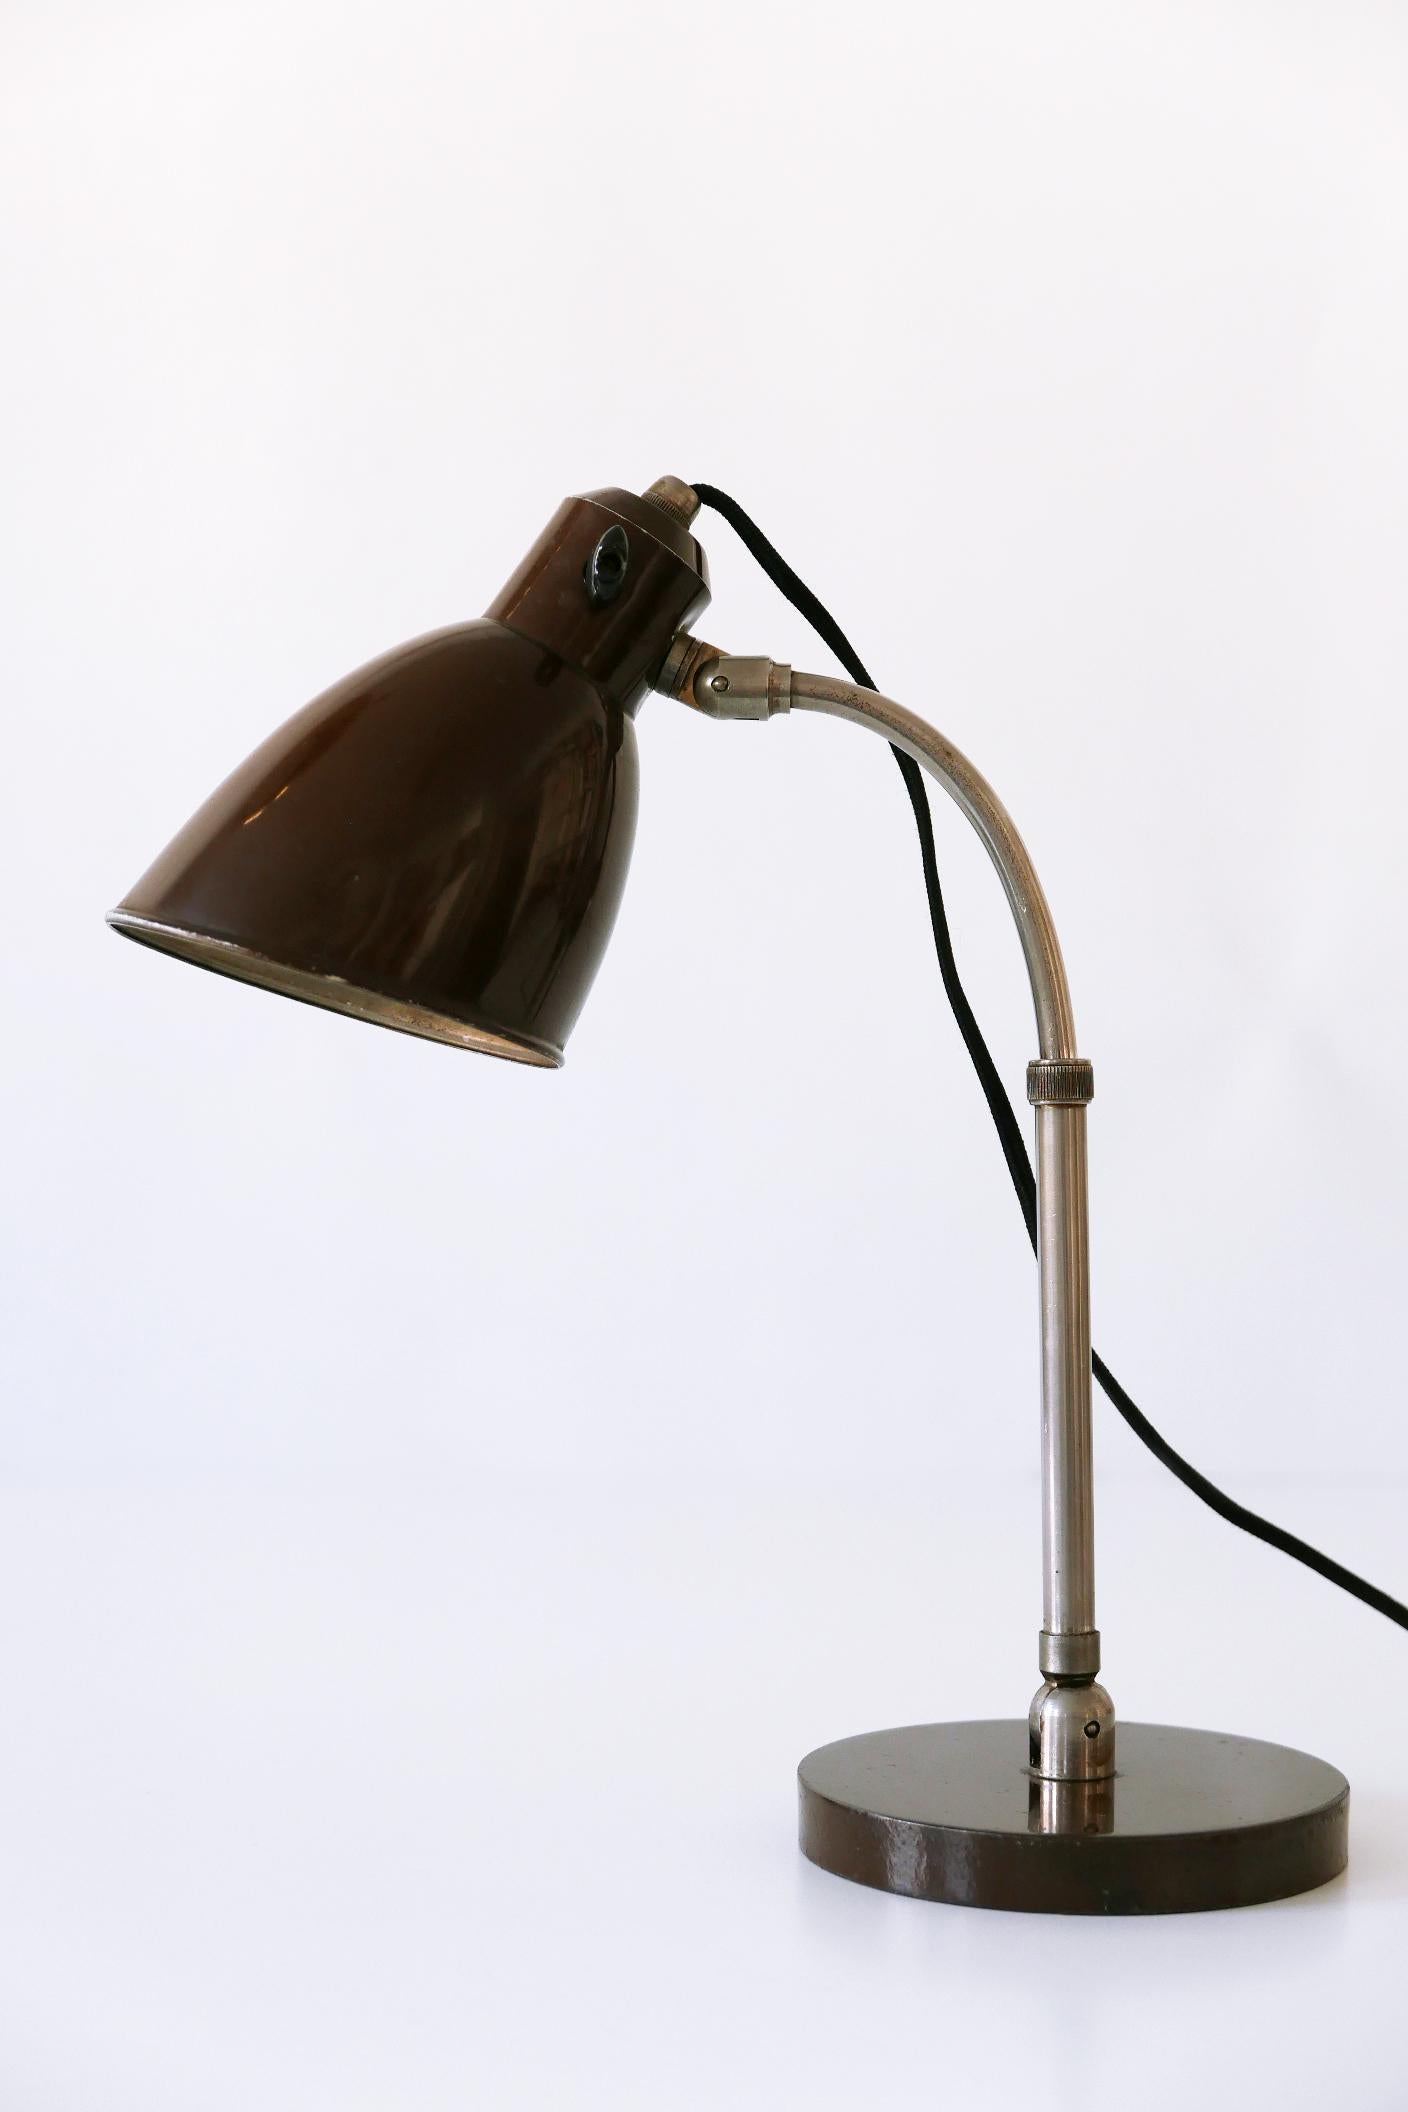 Rare Bauhaus Table Lamp 'Piccolo' by Christian Dell for Bünte & Remmler, 1930s For Sale 2